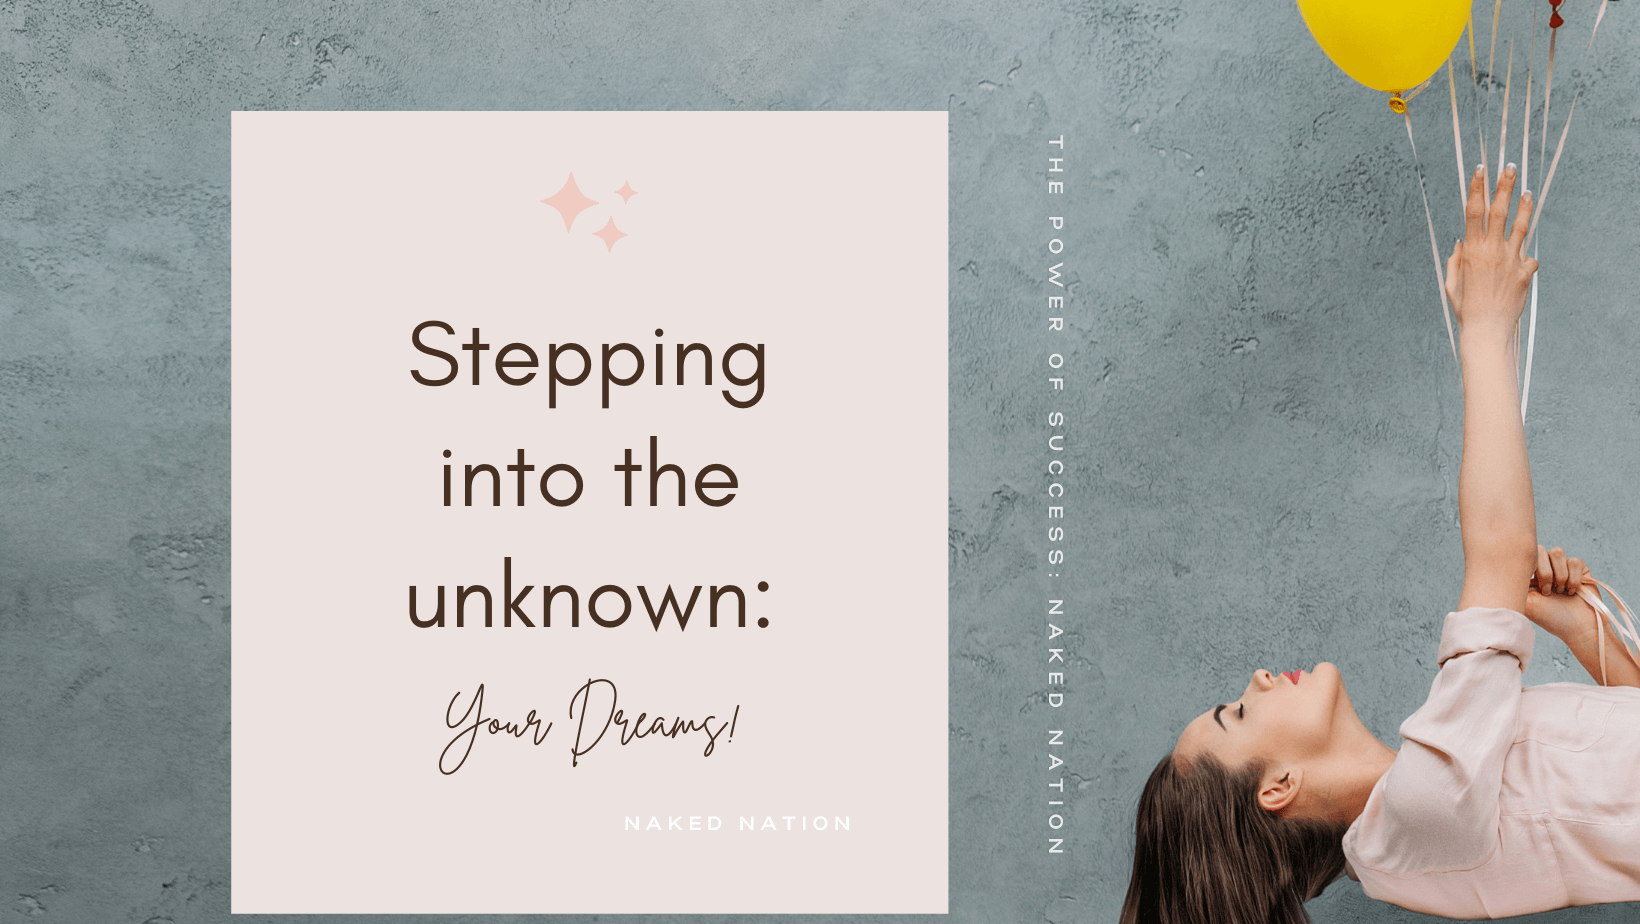 Stepping into the unknown: your dreams! - Naked Nation UK